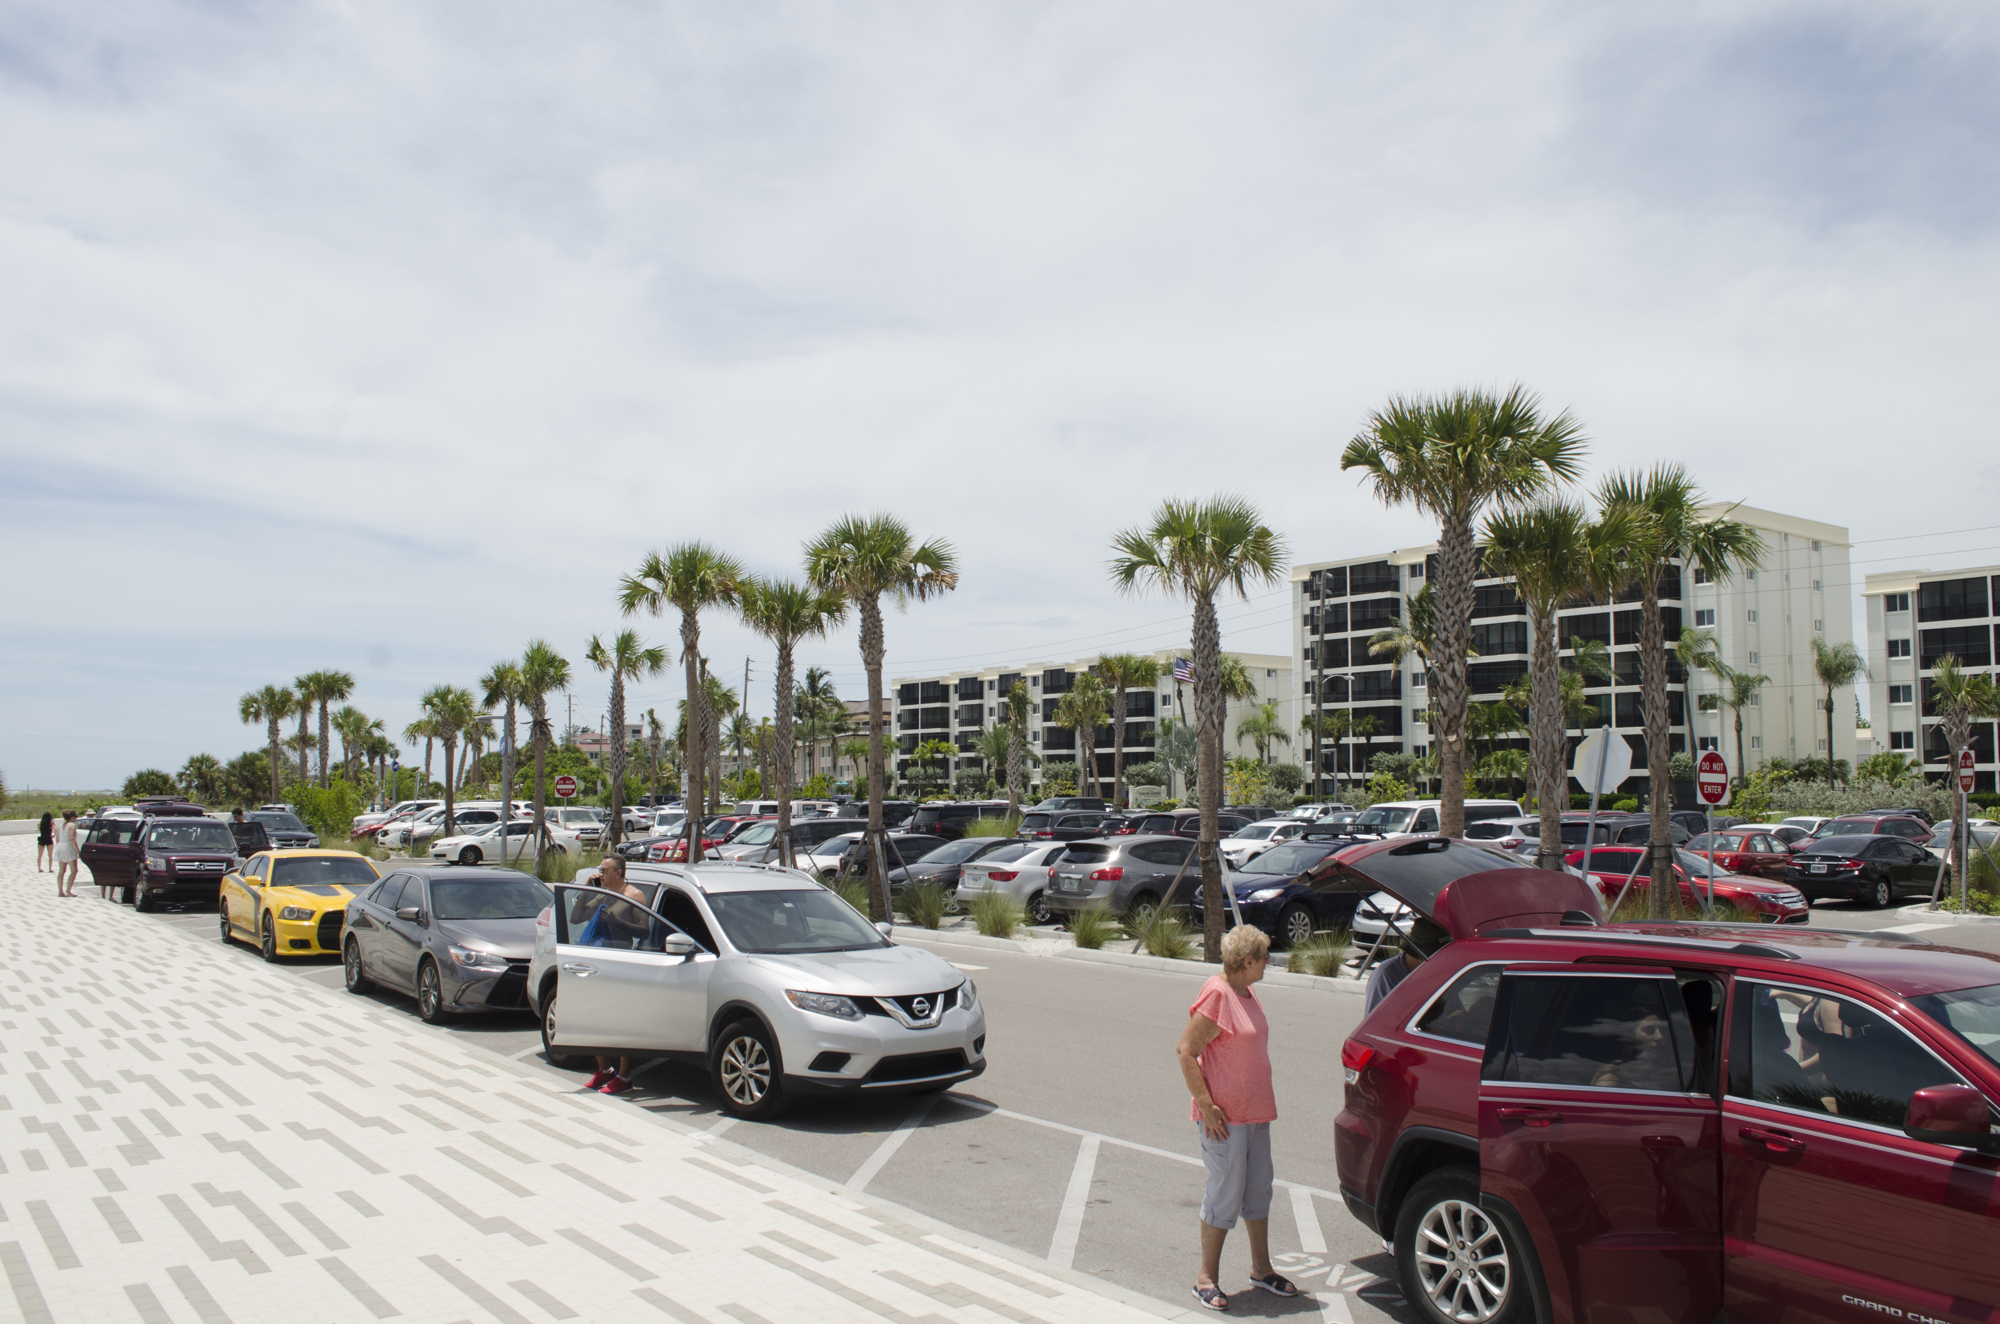 From downtown to Siesta Key, parking is an ever-present challenge in Sarasota.